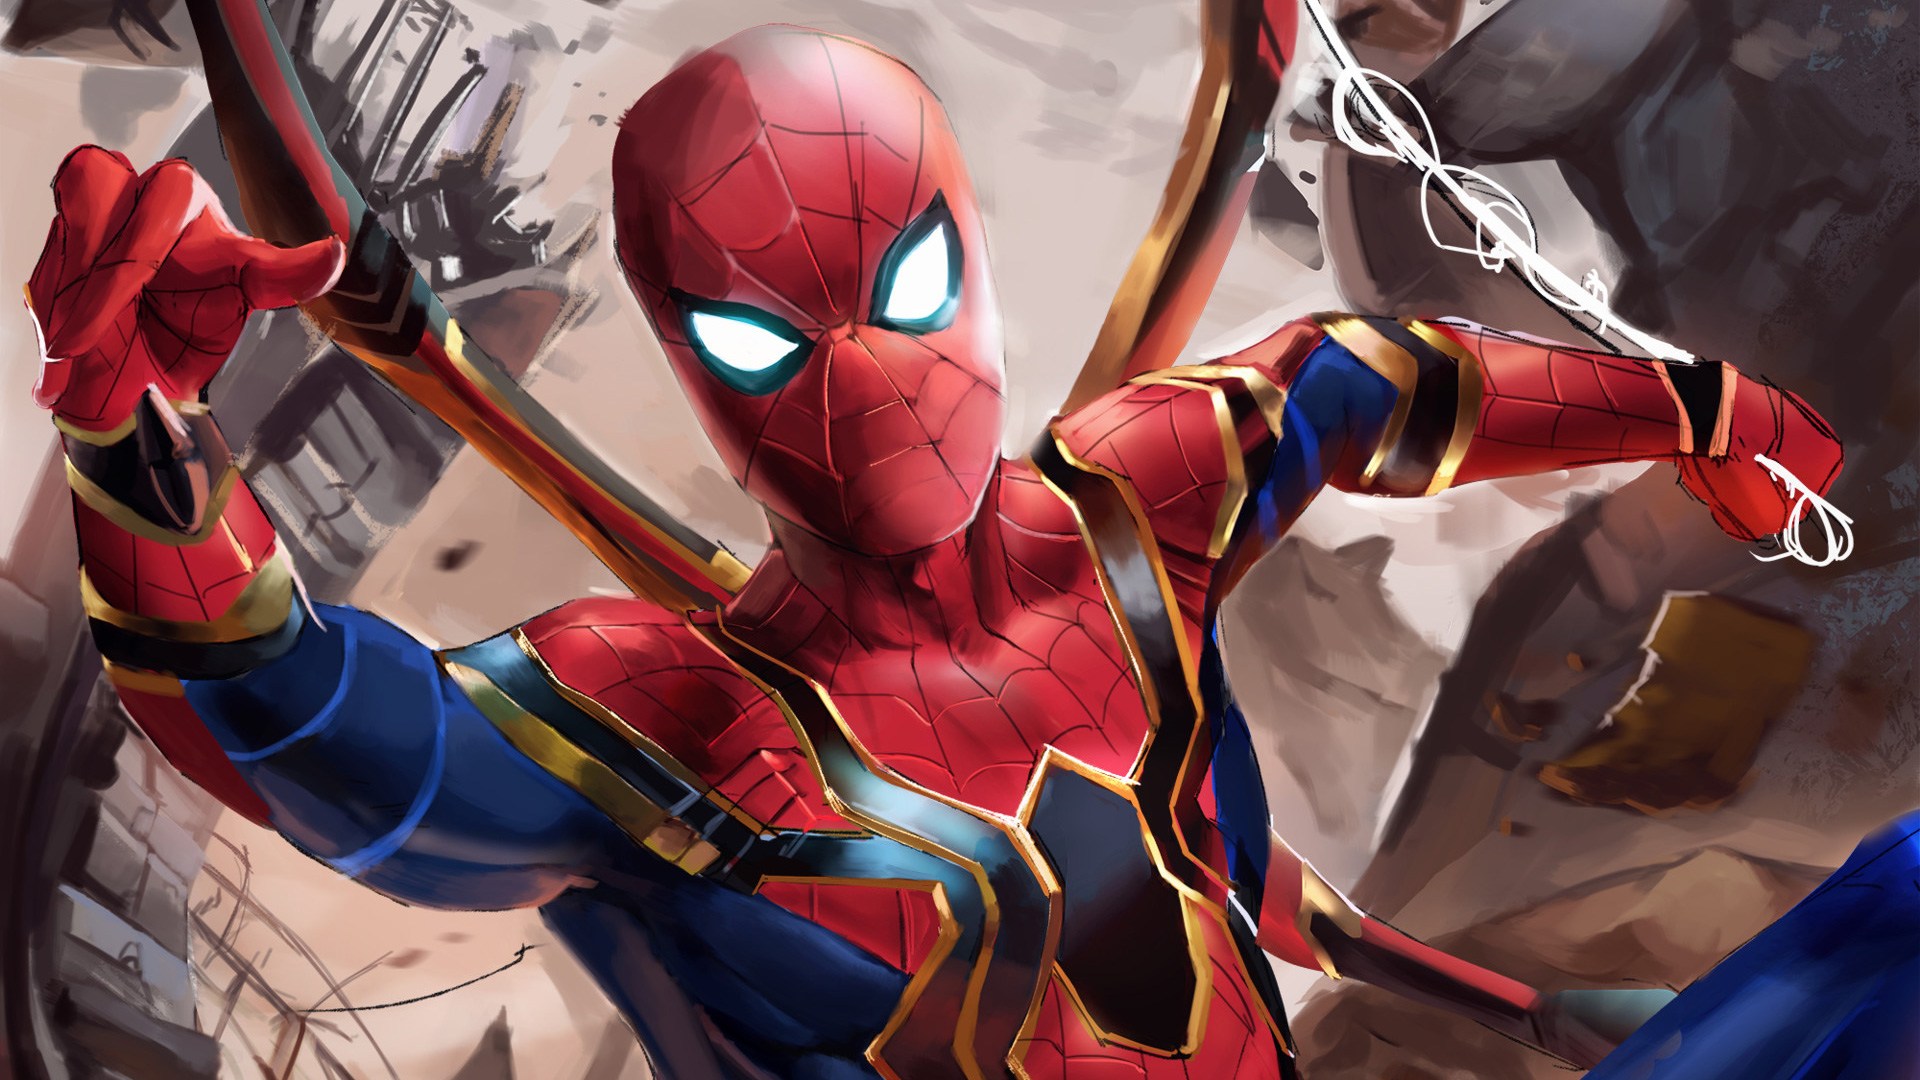 Iron Spider Suit In Avengers Infinity War - Iron Spider Avengers Infinity War , HD Wallpaper & Backgrounds